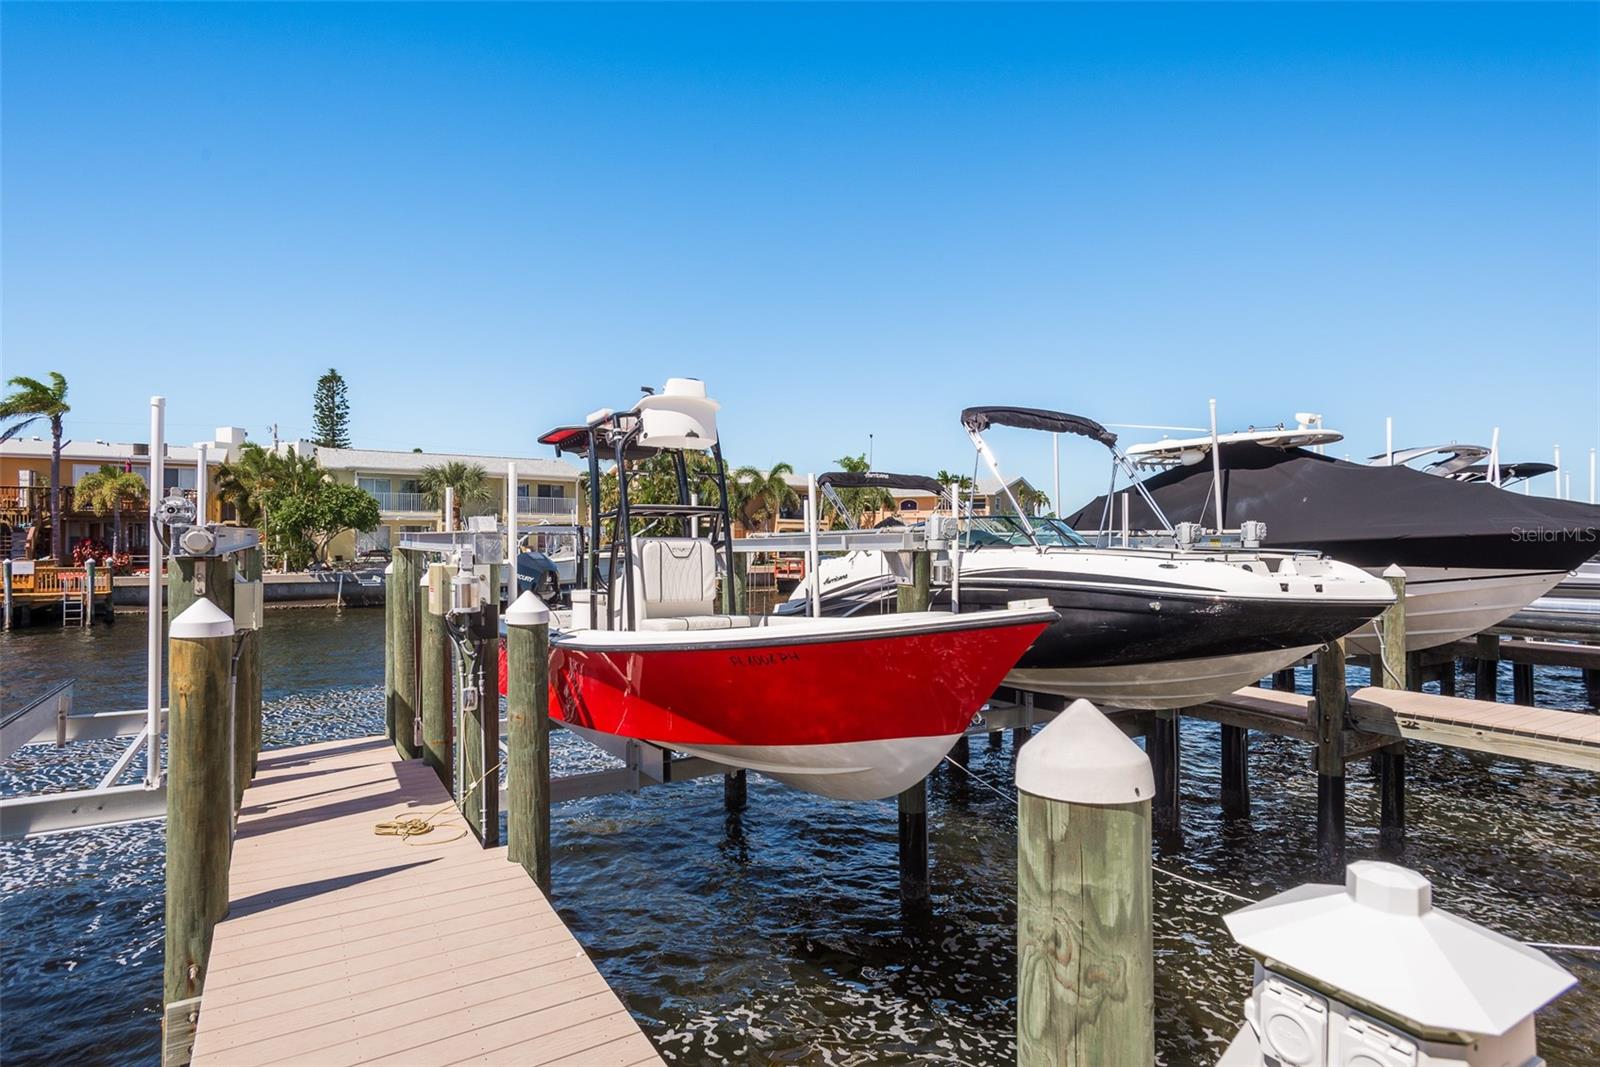 Dock your boat with ease at your private boat dock equipped with a 10,000-pound hydraulic lift, offering both convenience and peace of mind as you embark on unforgettable maritime journeys from your coastal sanctuary.